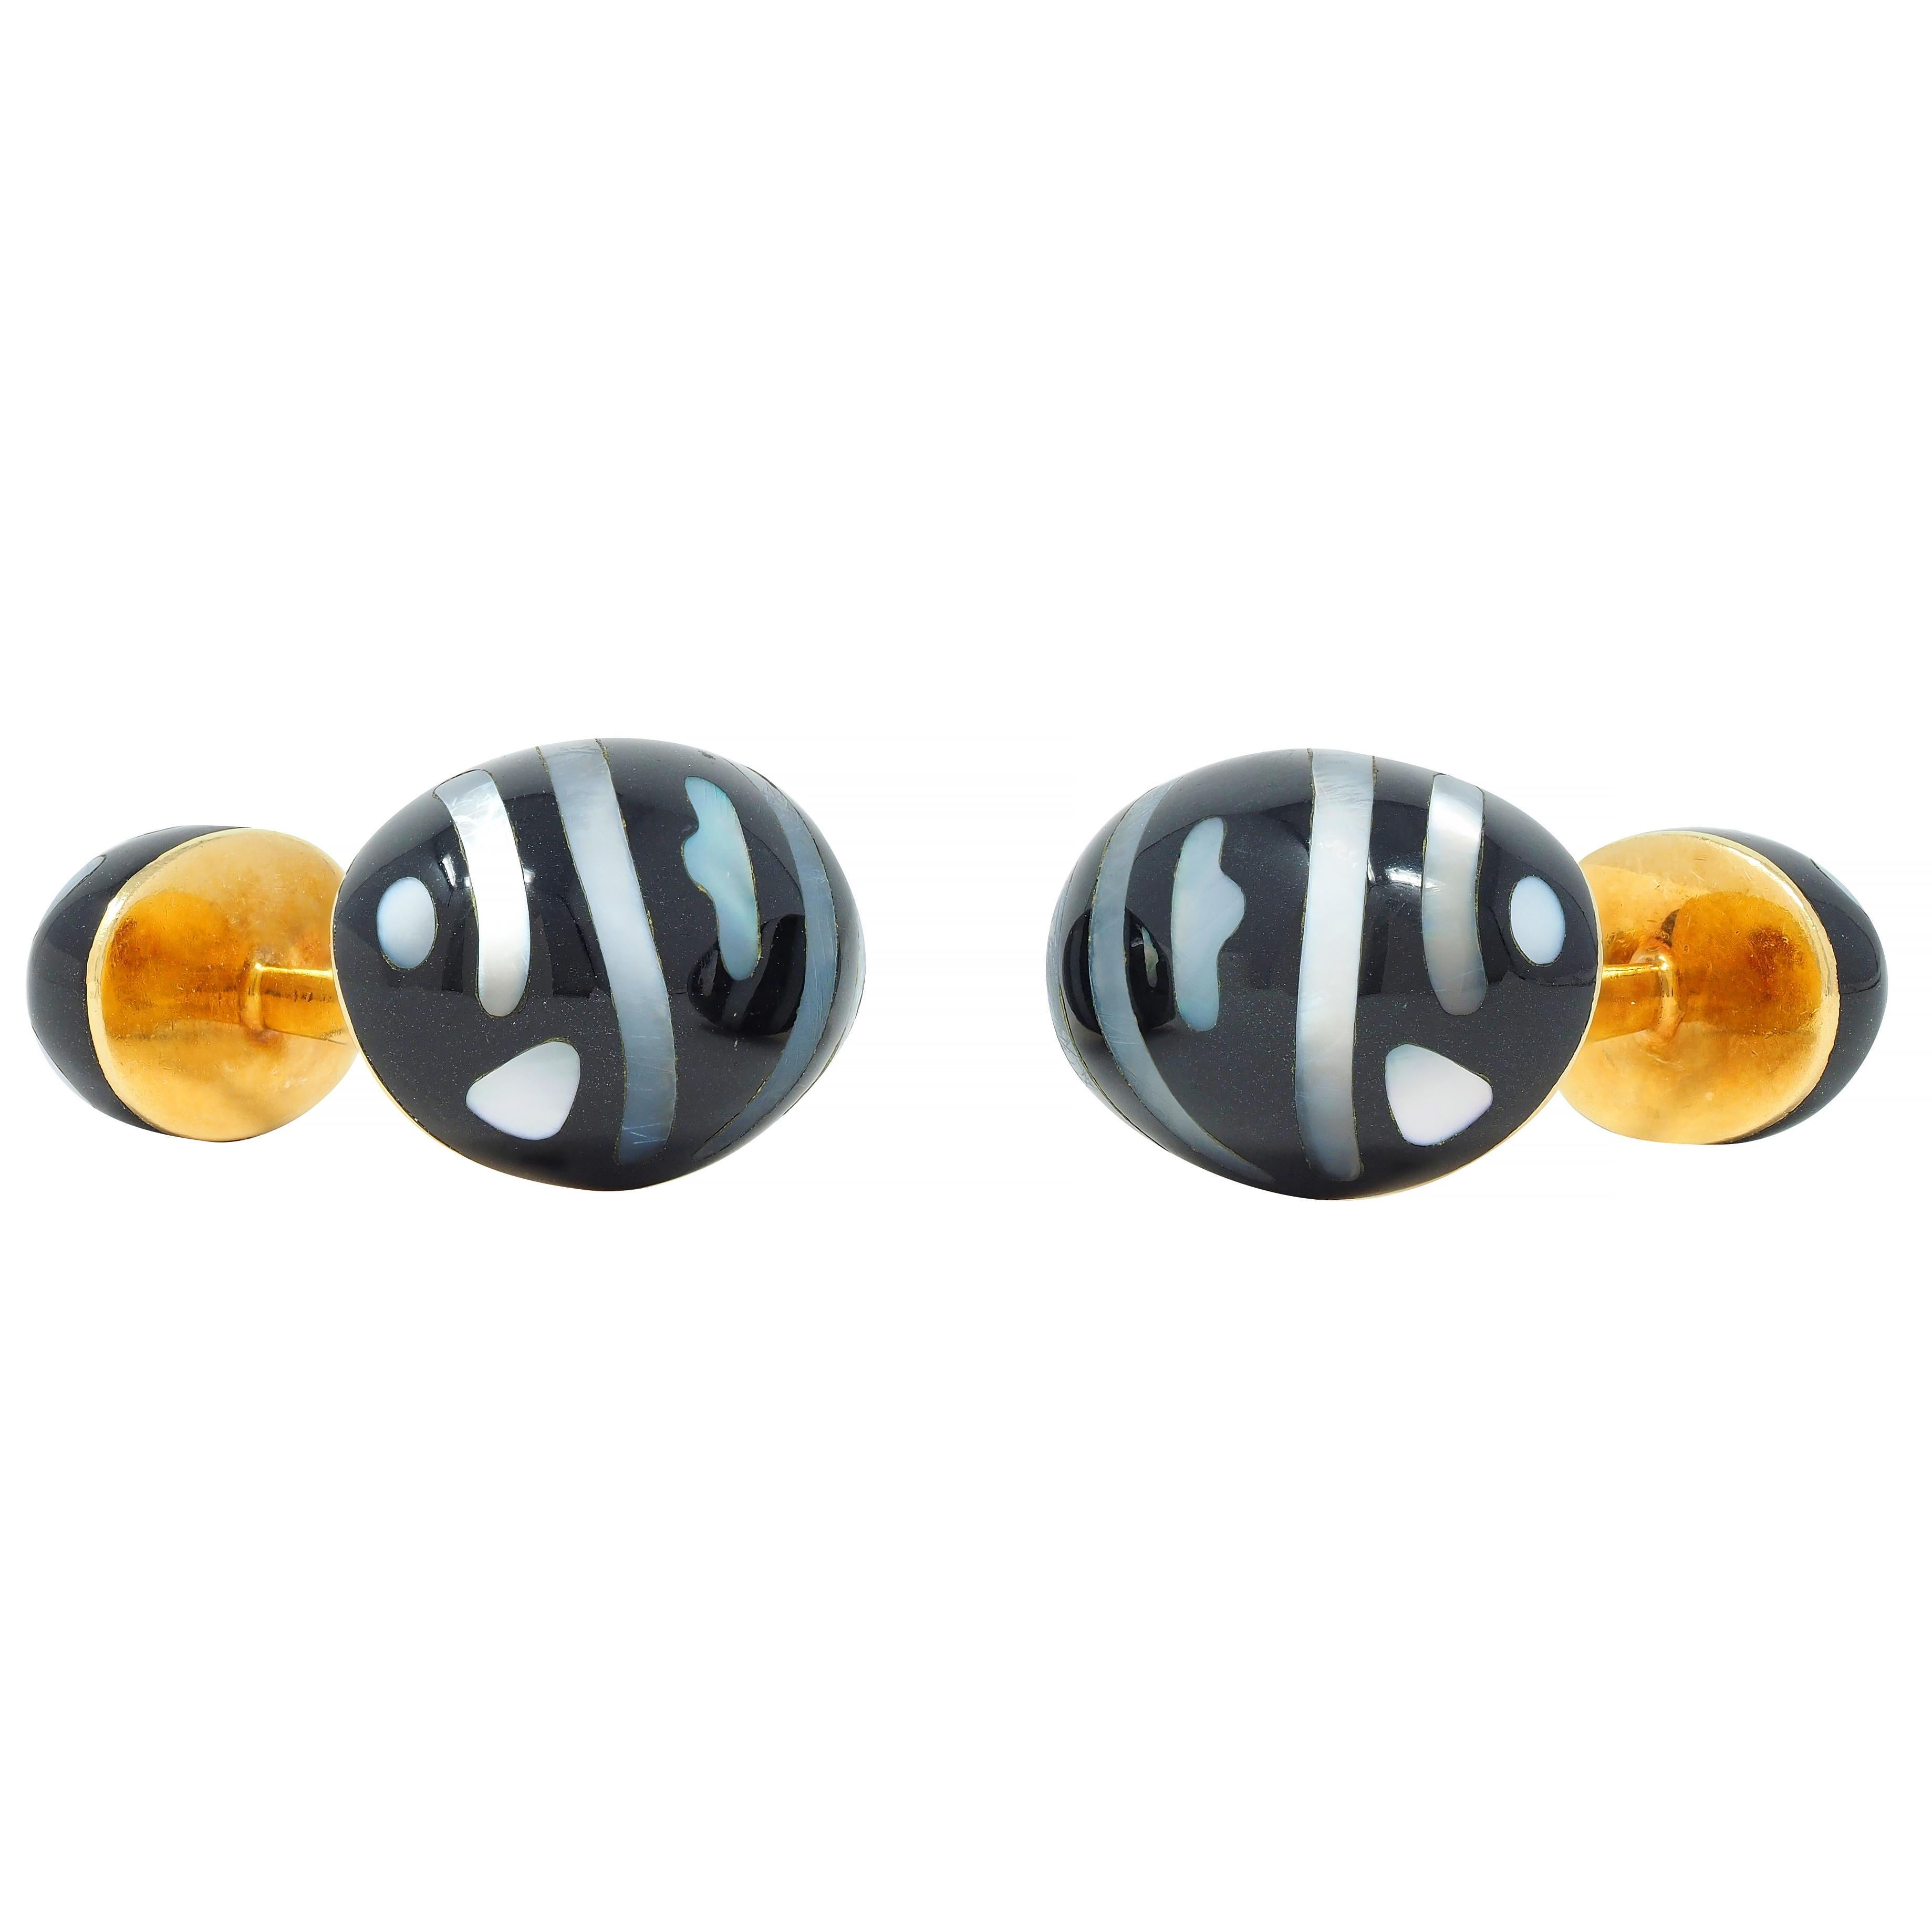 Designed as barbell style cufflinks terminating with one large and one small oval 
Comprised of carved jade cabochons - opaque glossy black 
Inlaid with organic mother-of-pearl stripe pattern
Translucent white with strong iridescence 
Stamped for 18